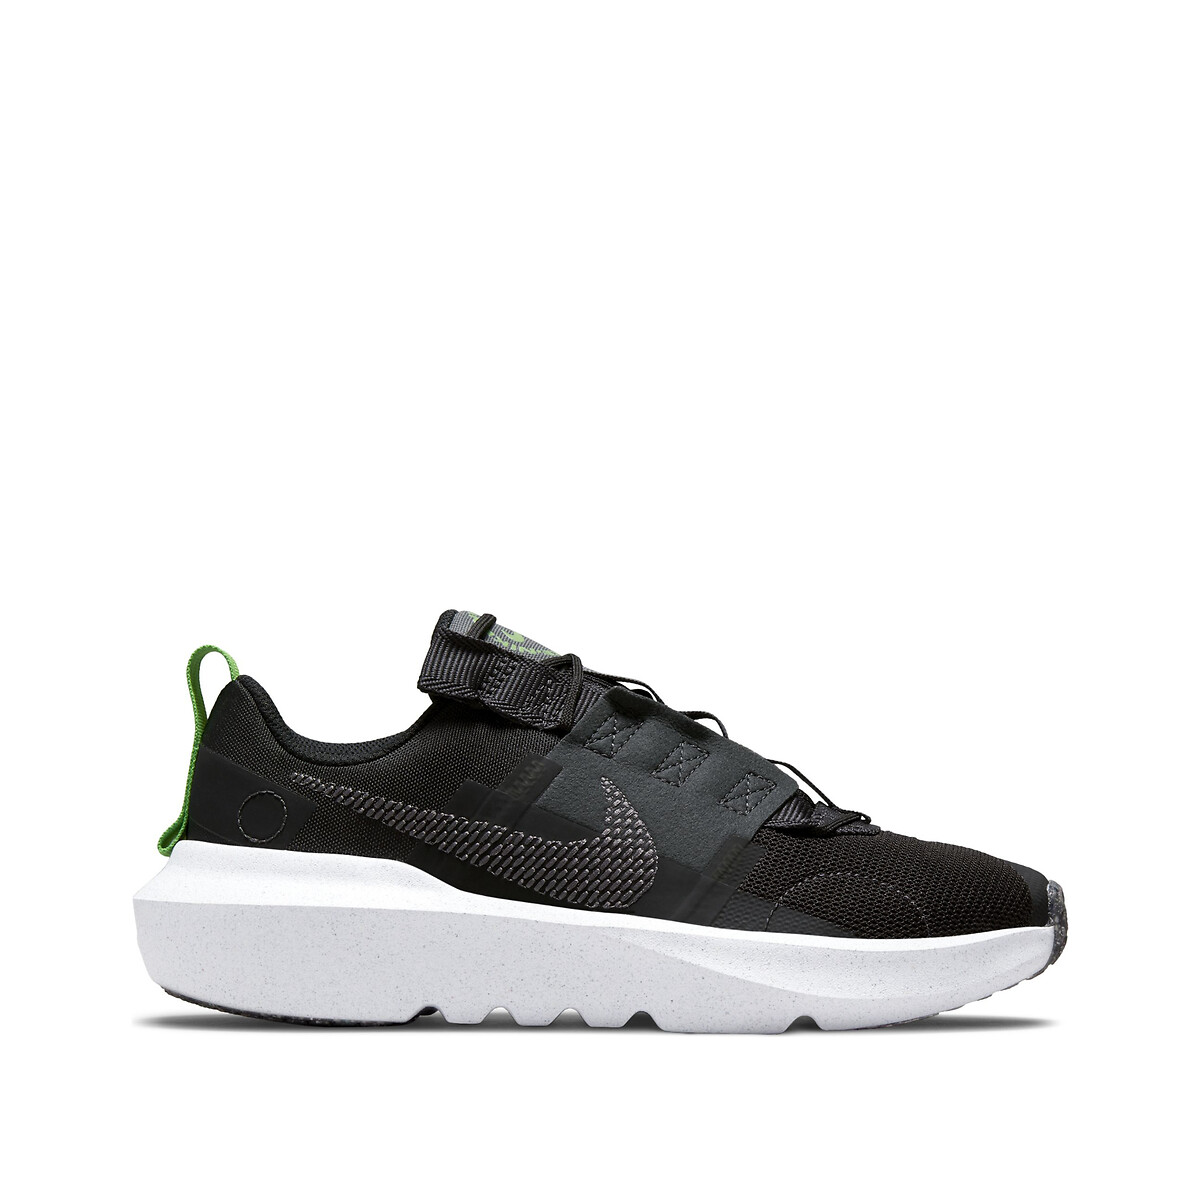 Kids crater impact trainers, black, Nike | La Redoute